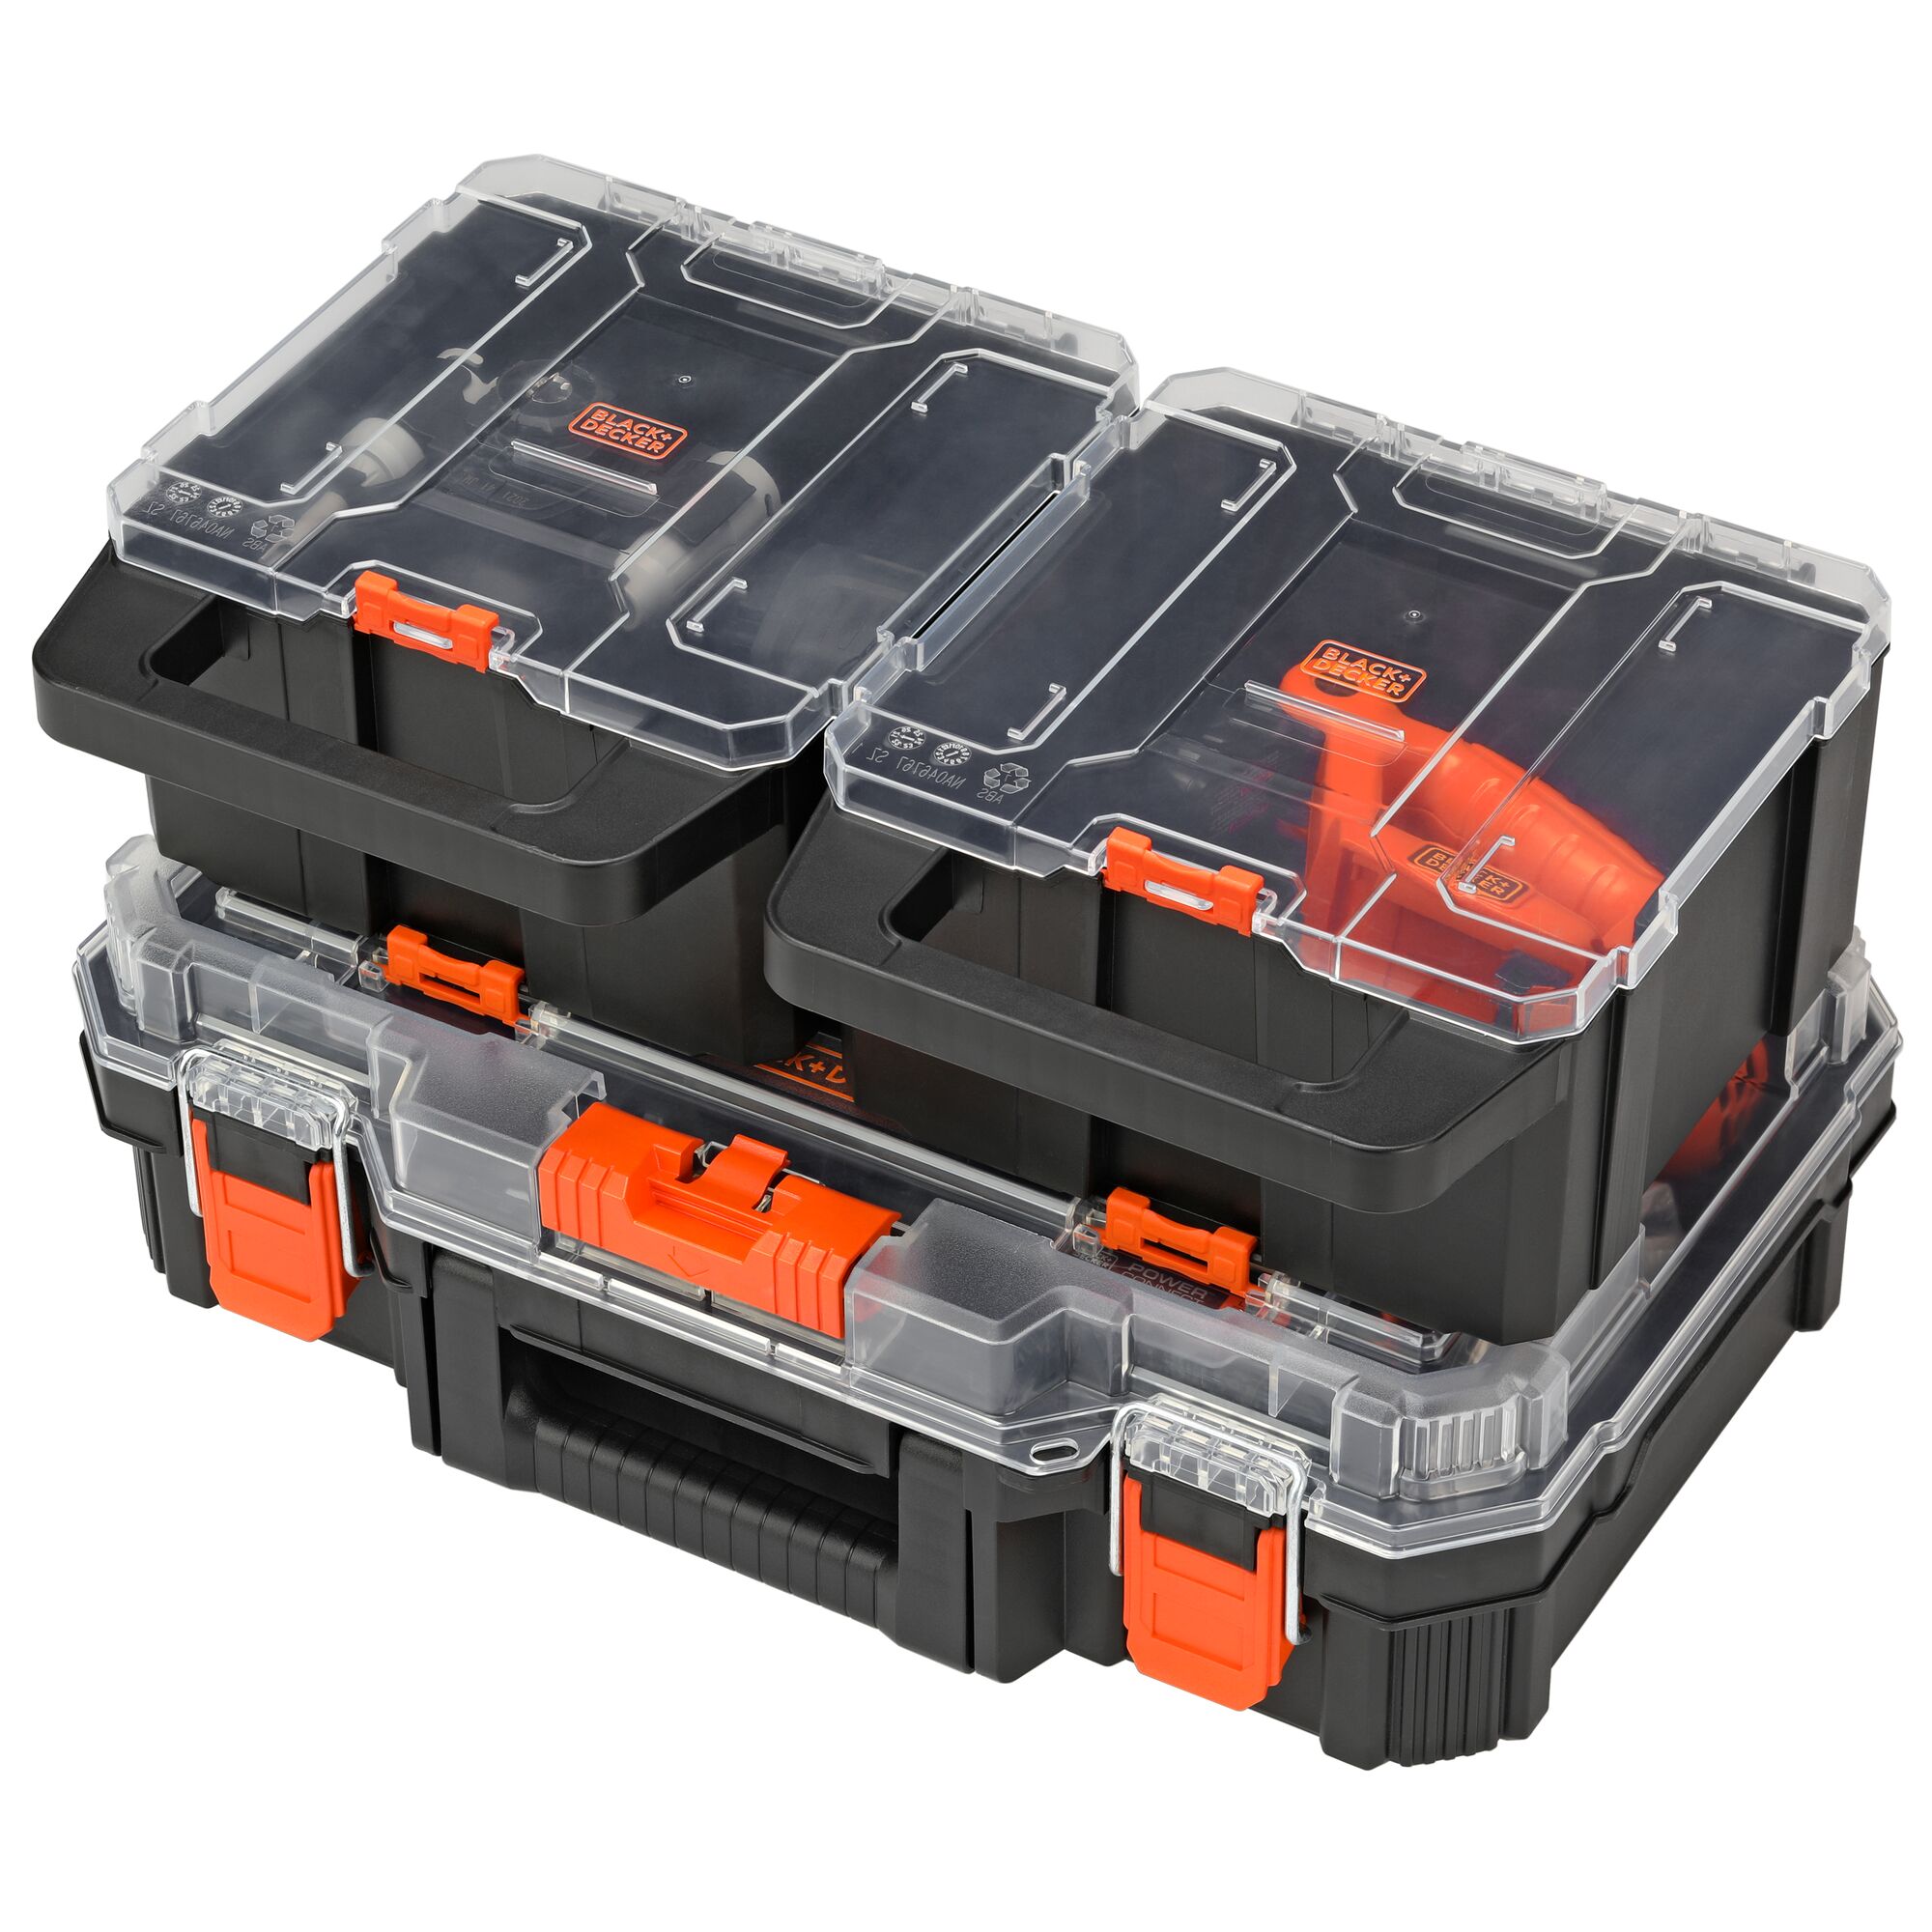 BLACK+DECKER 8-Tool Power Tool Combo Kit with Hard Case (1-Battery